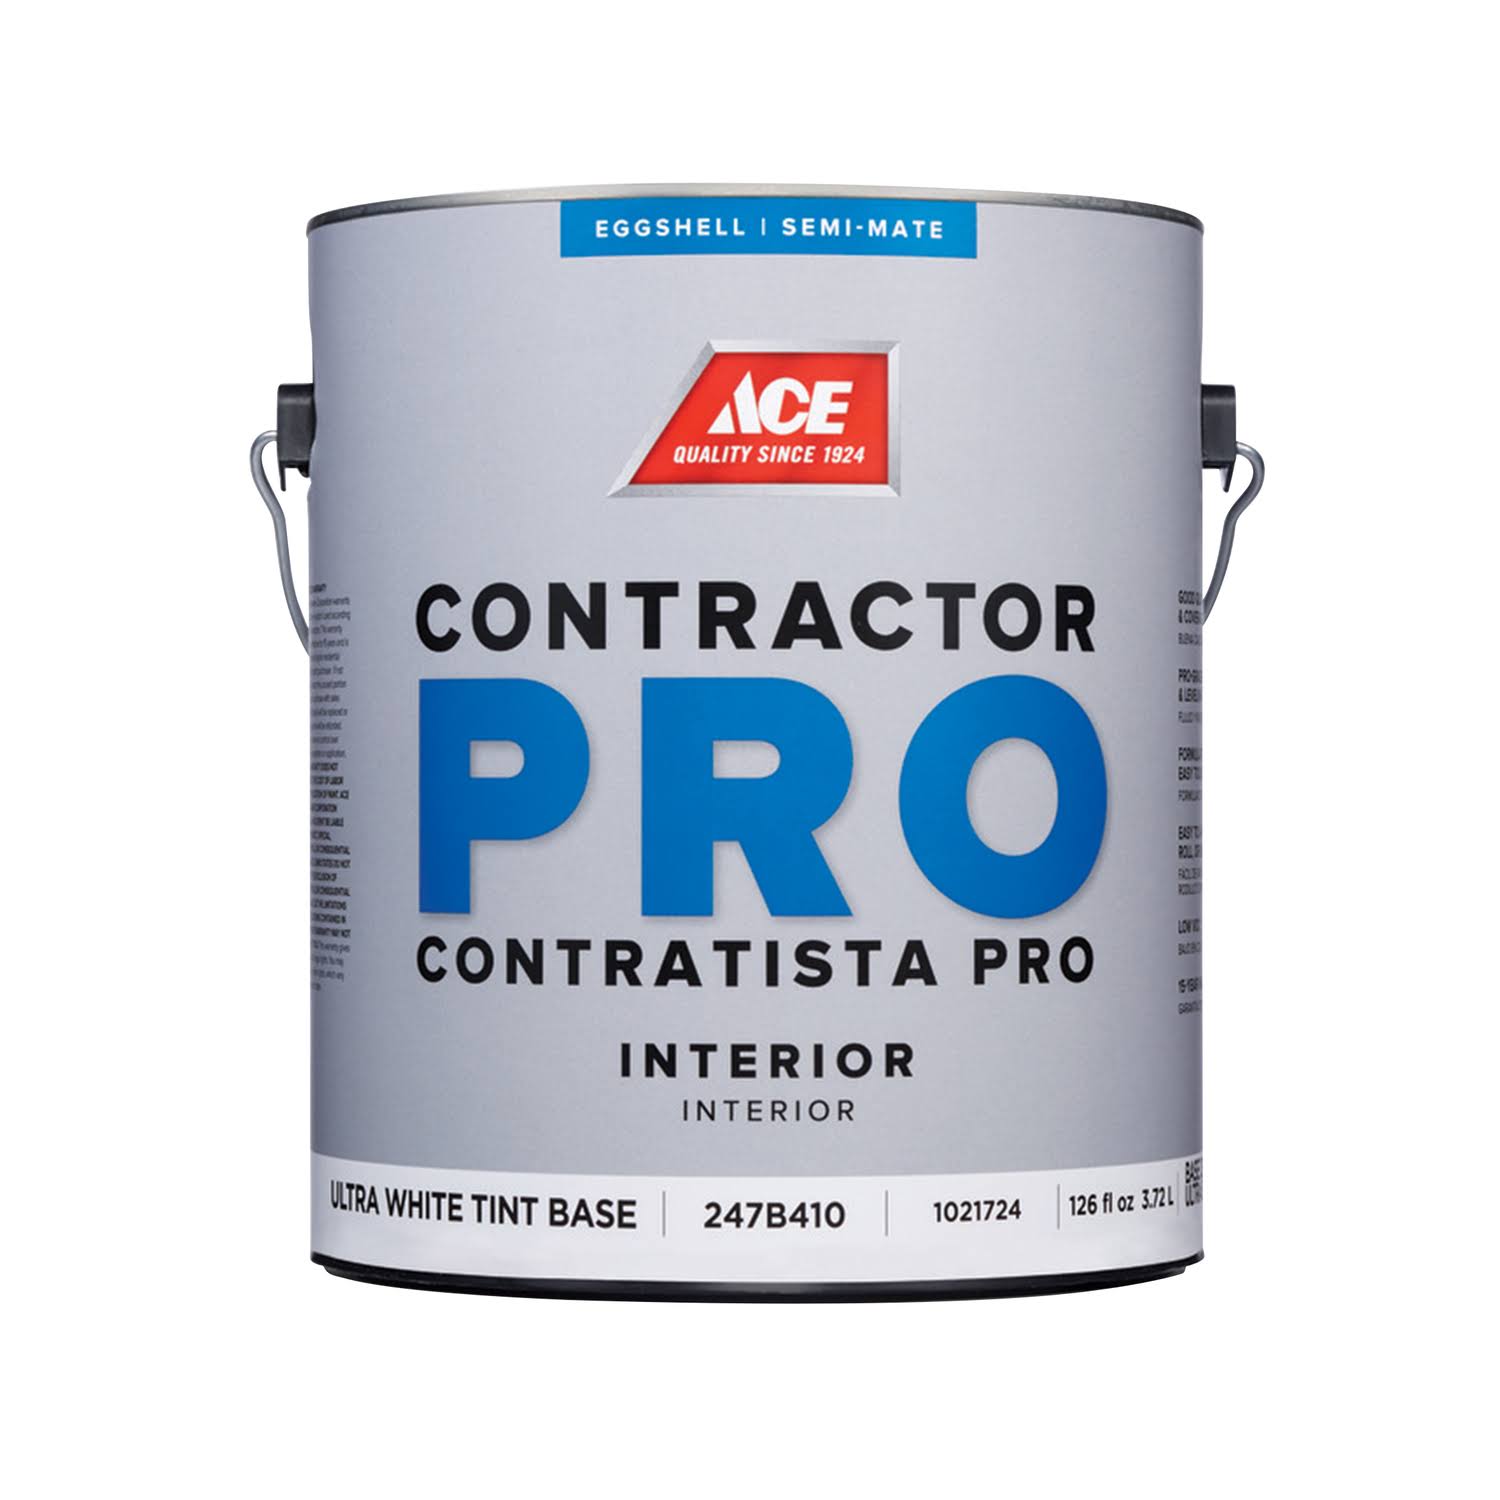 Ace Contractor Pro Eggshell Tint Base Ultra White Base Latex Paint Indoor 1 gal.